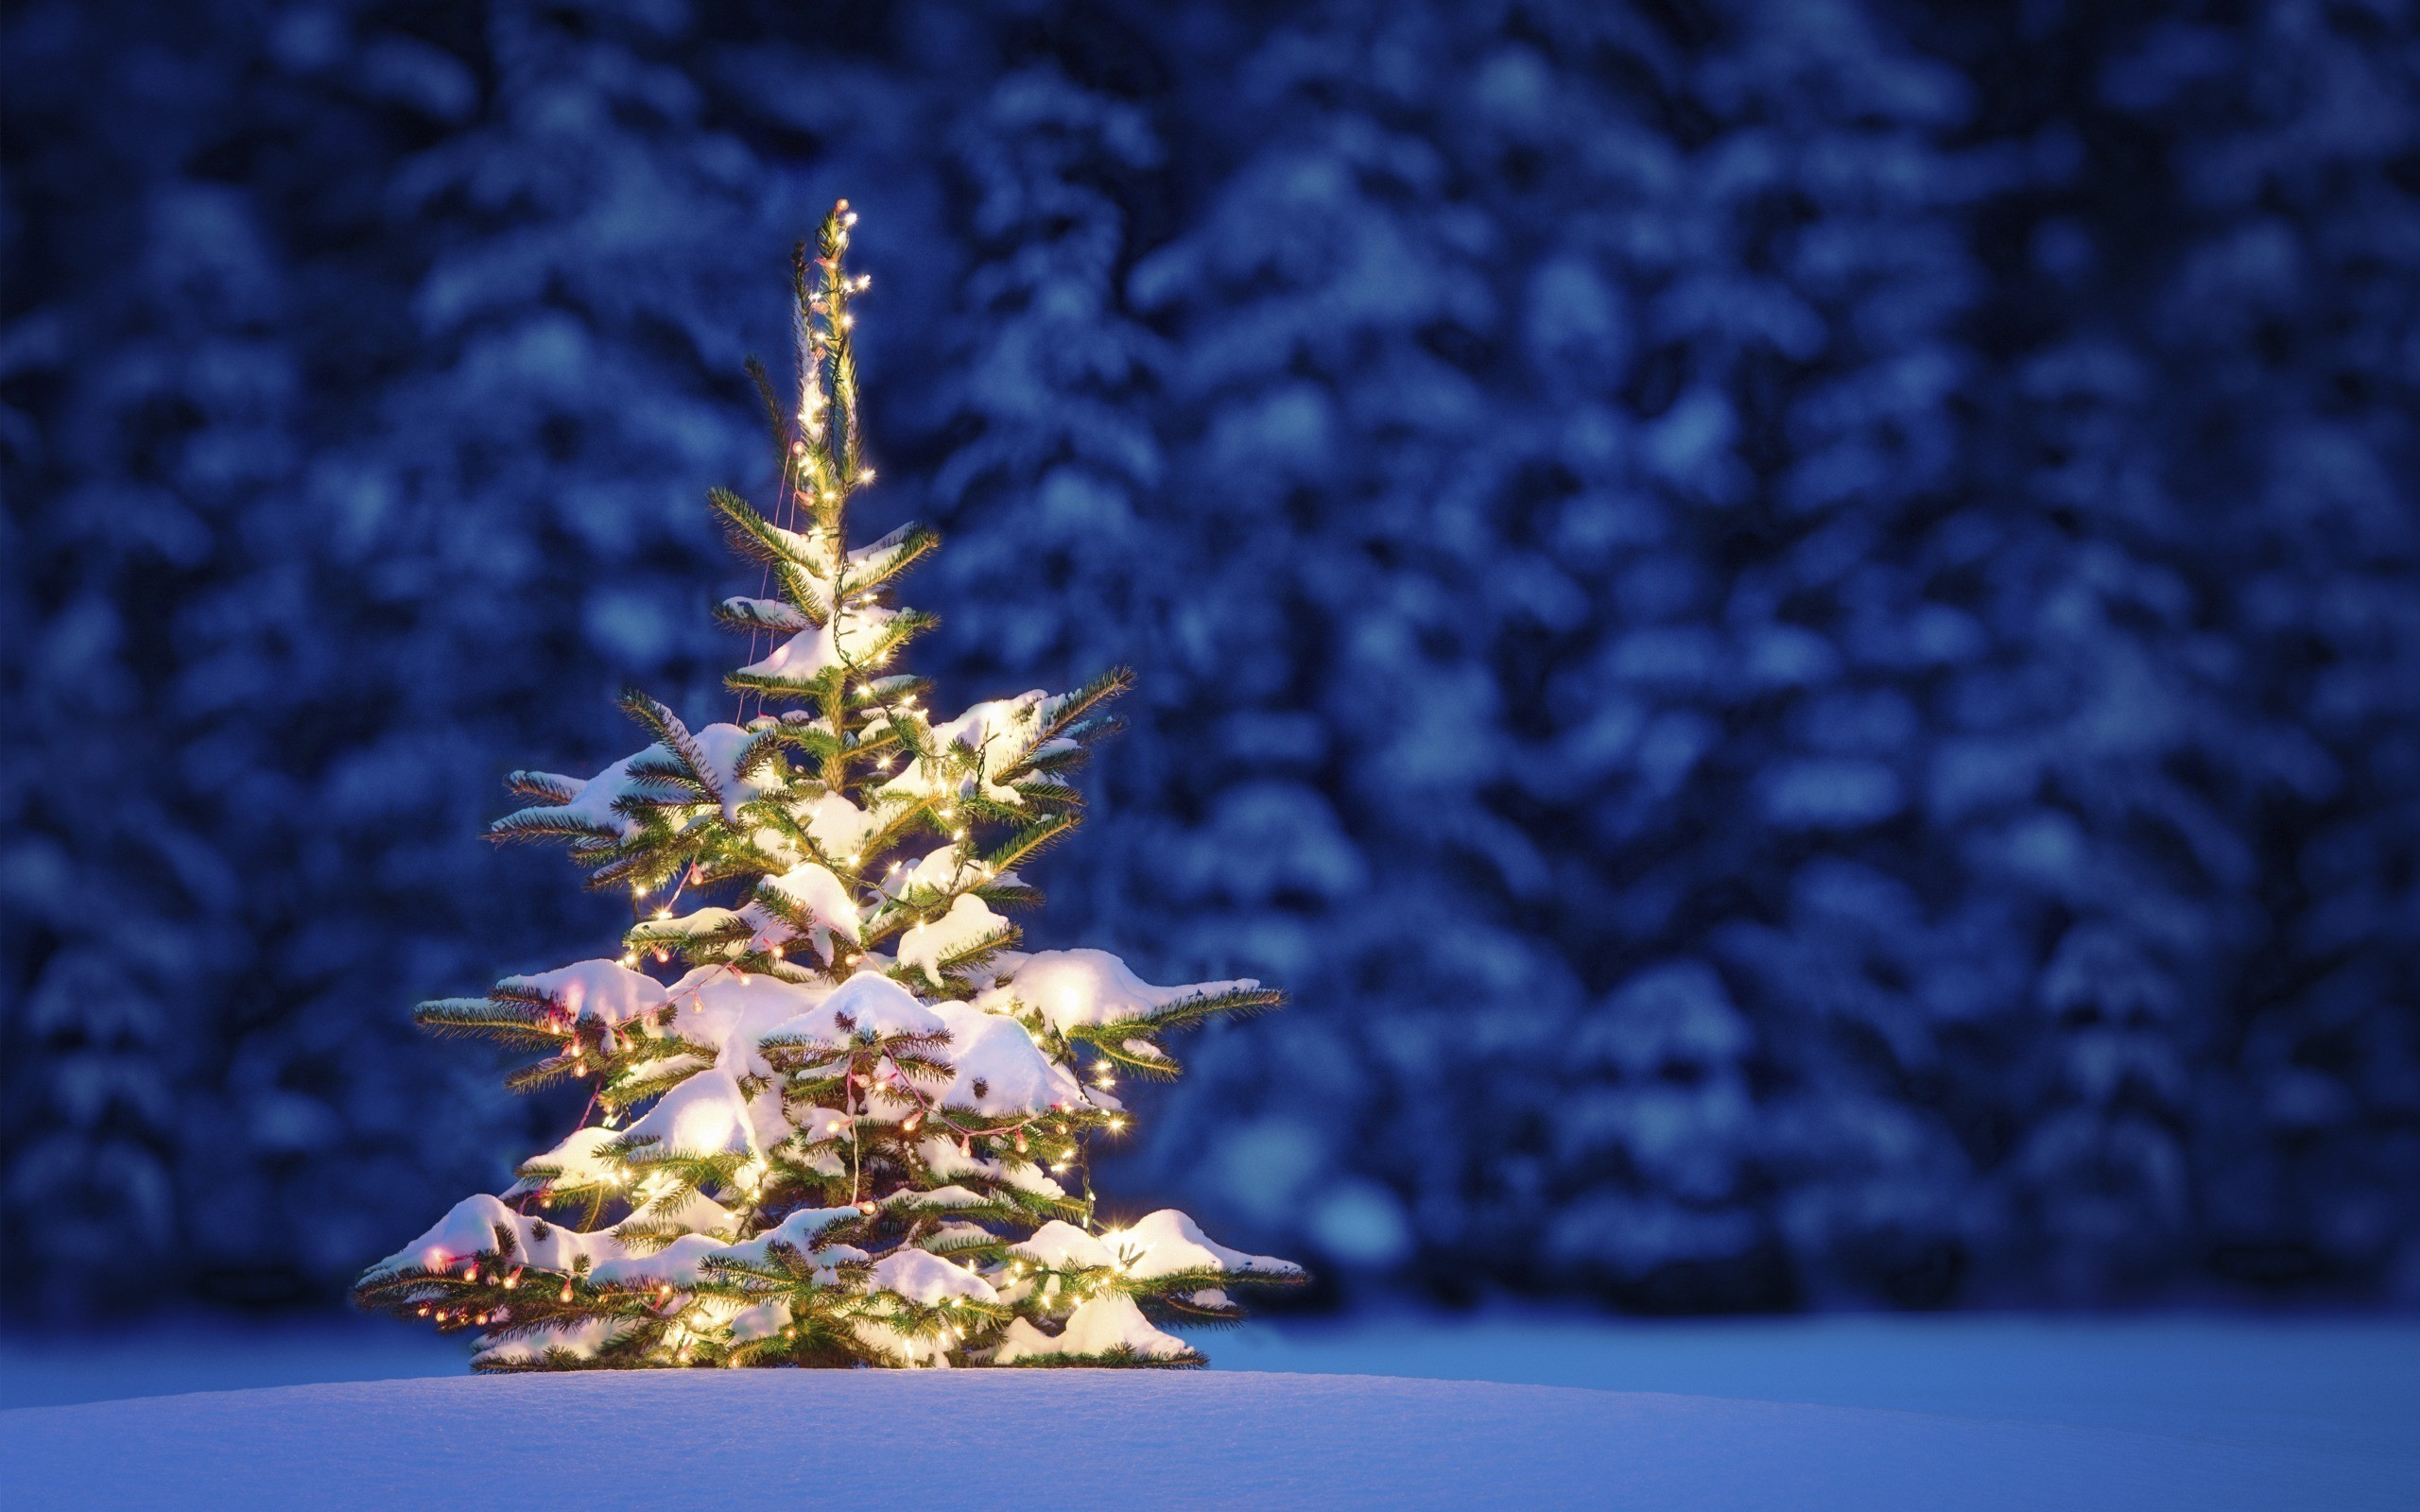 2560x1600 RLC:42 - Christmas Tree HD Images - 43 Free Large Images